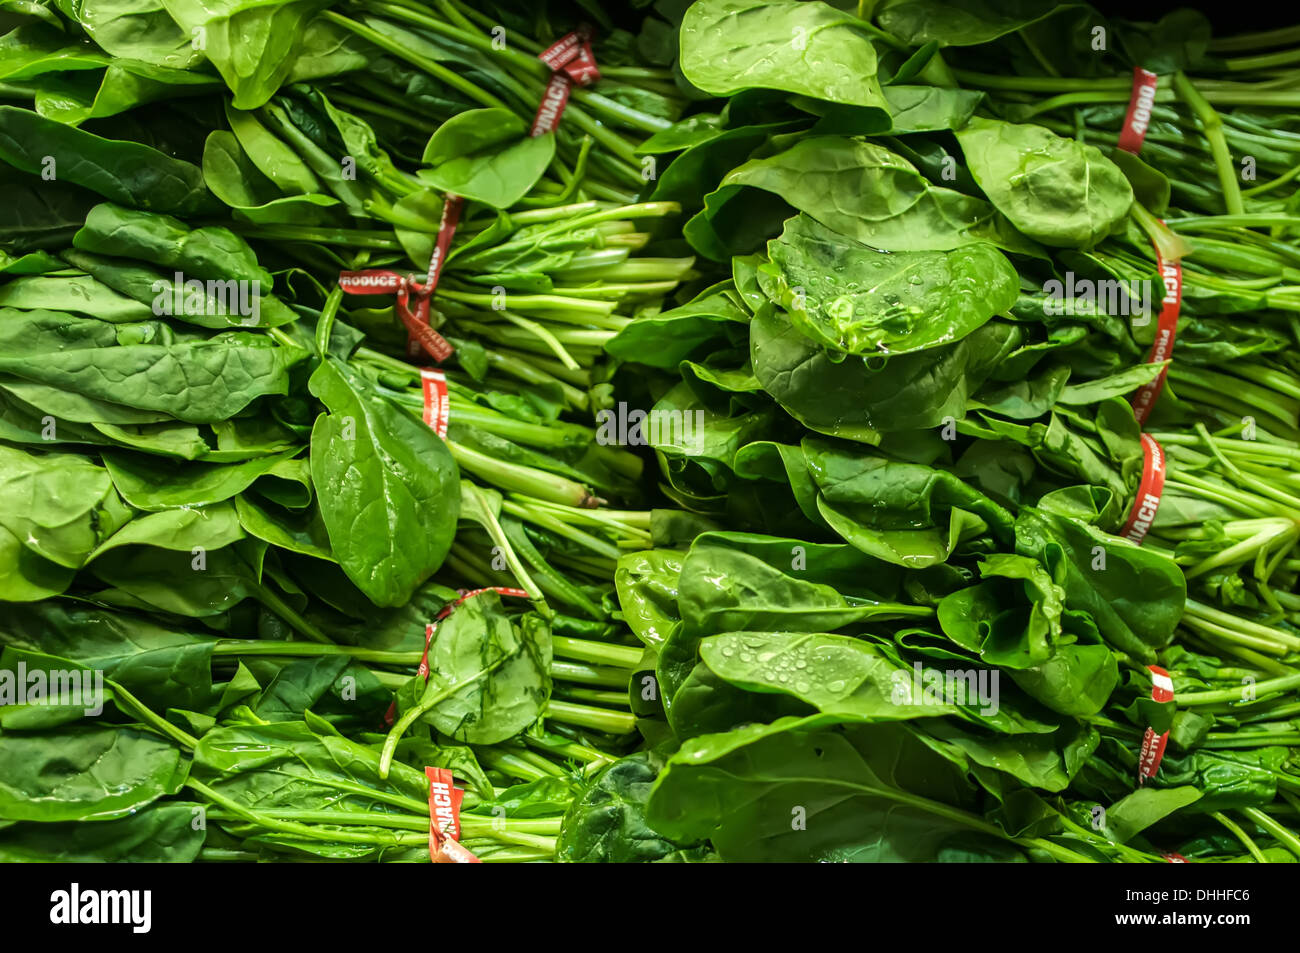 fresh green leaves spinach Stock Photo